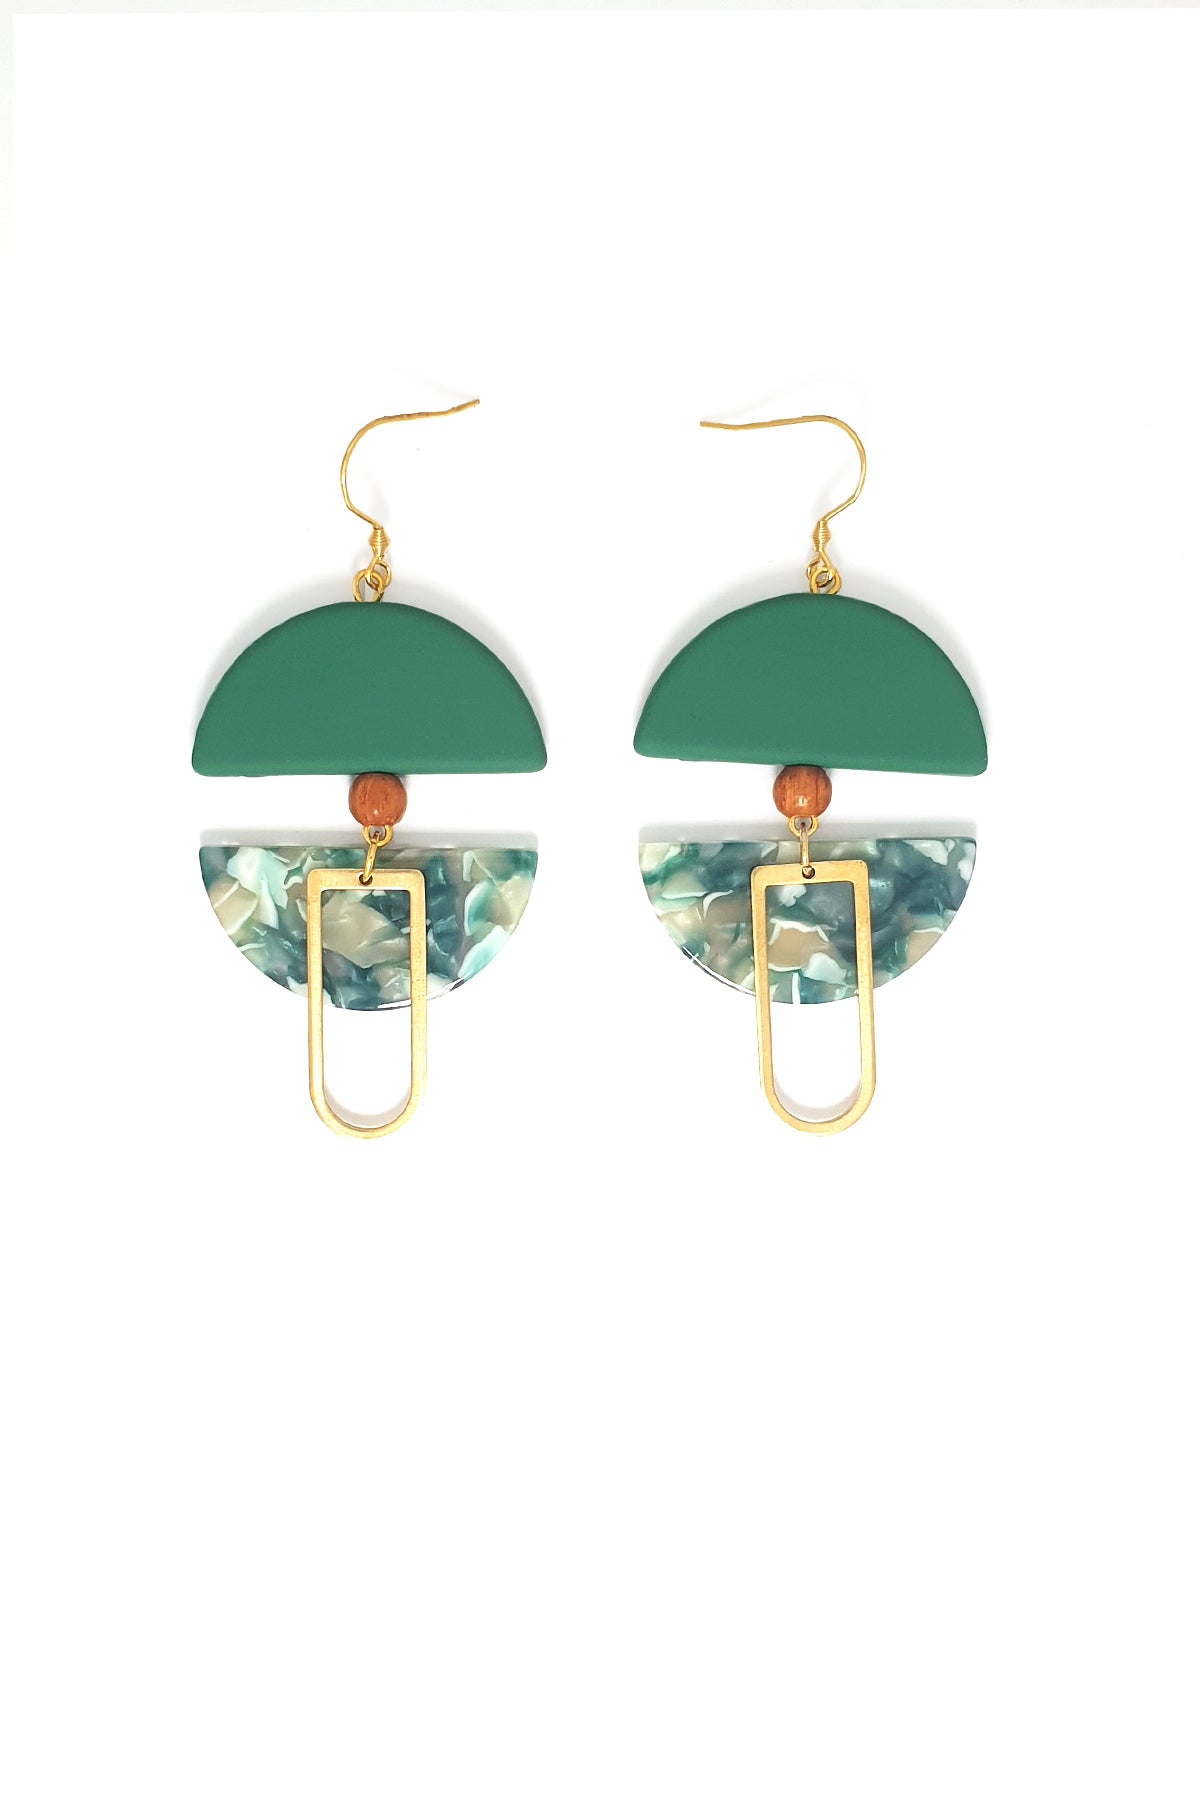 A pair of dangle earrings with a hook sit against a white background. They feature a green arch shaped bead, a small wooden bead, a green acrylic half circle, and an elongated D shape brass piece.